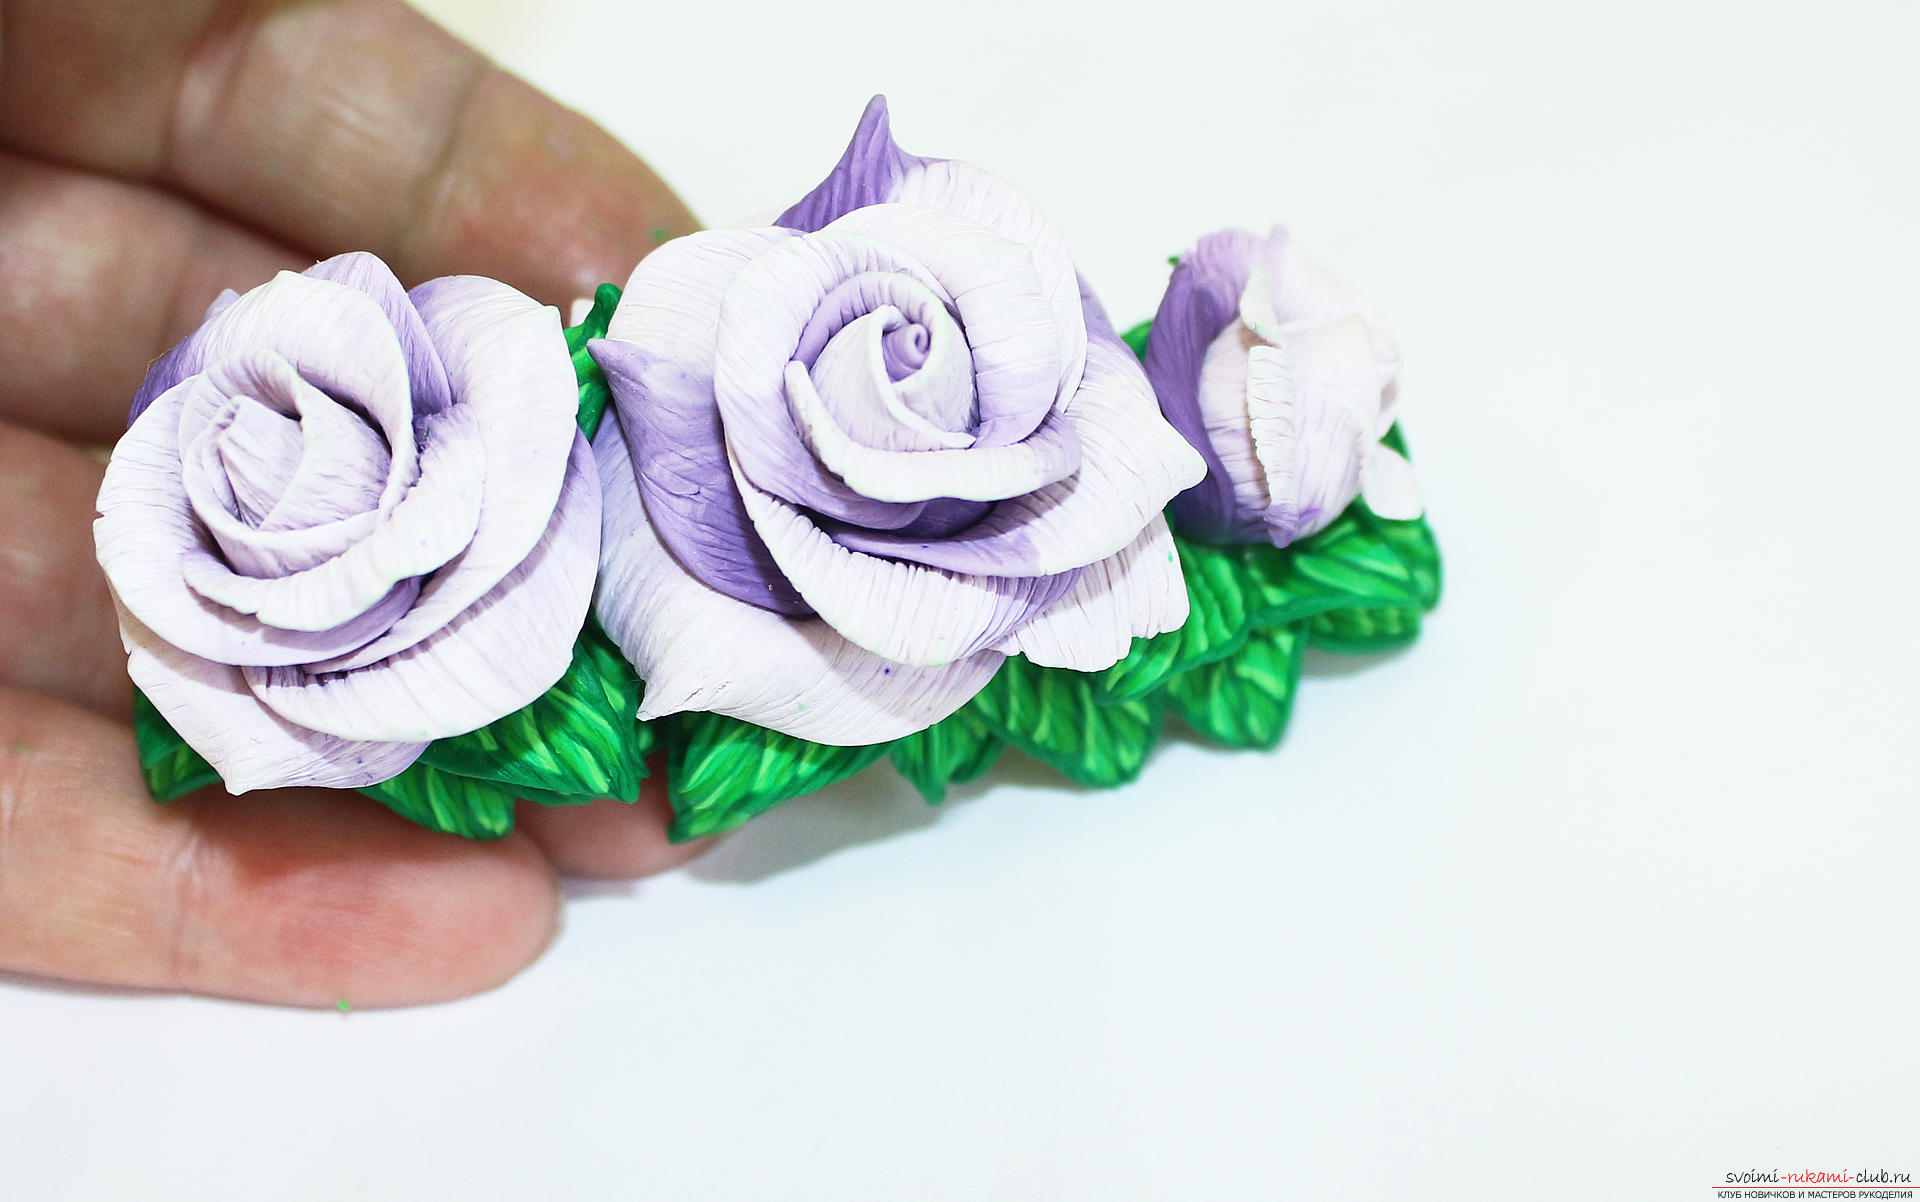 This master class with a photo and description will teach you how to make flowers - roses - from polymer clay in texturing technology. Photo # 84